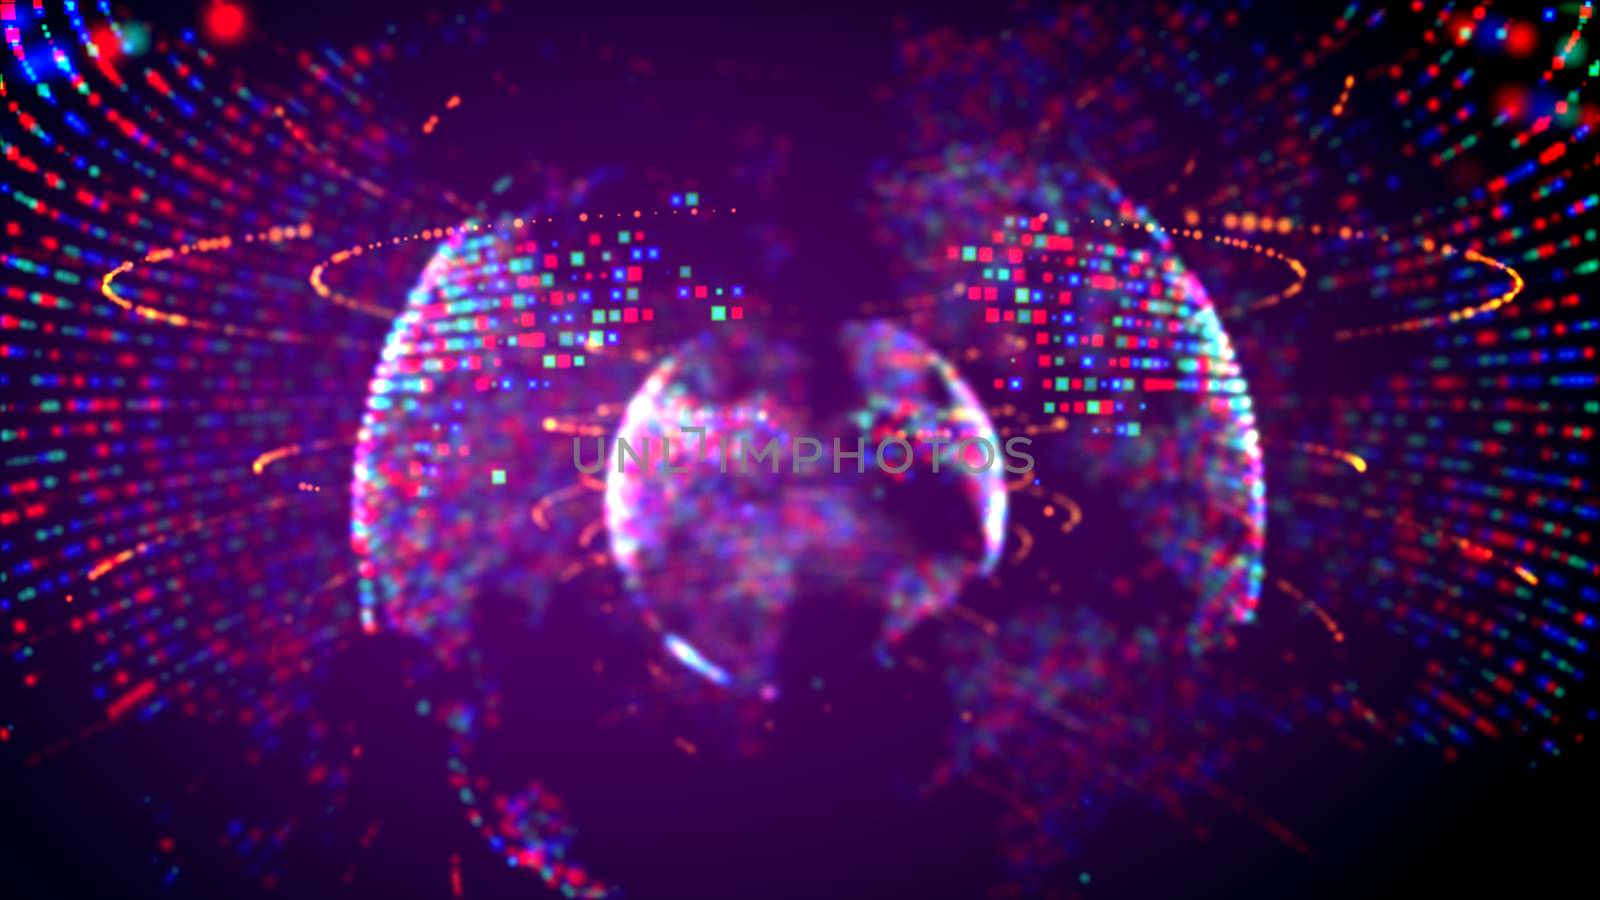 Amazing 3d illustration of four shimmering blue and red spheres spinning inside of each other in the black background with orange lines around. It looks like a pop music light.